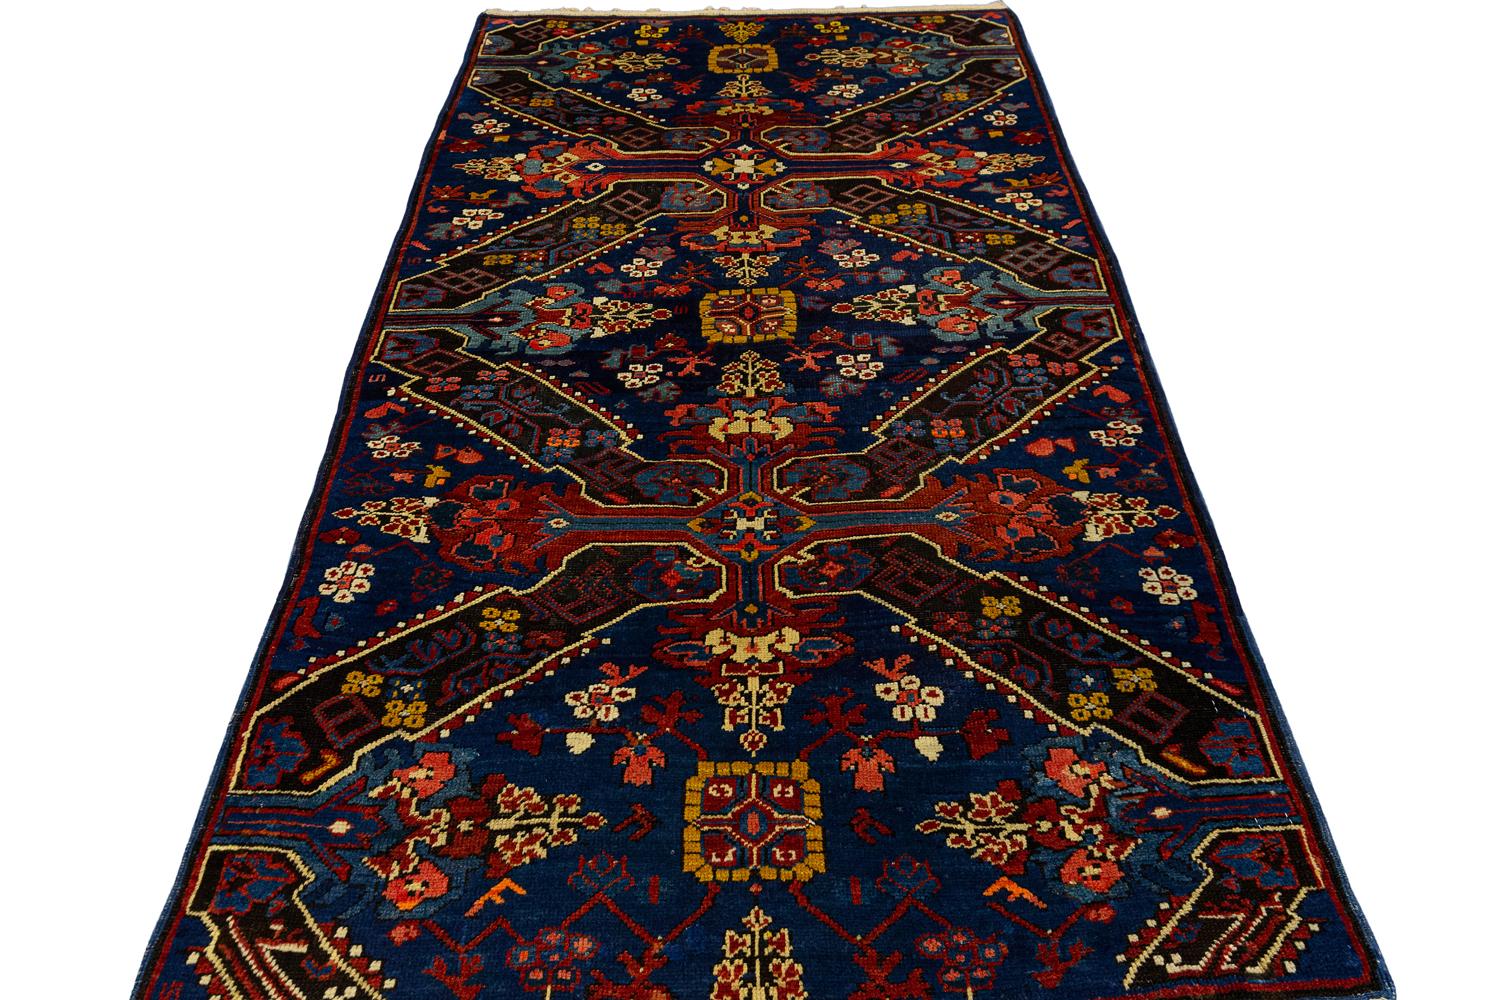 Hand-Knotted Seychour with All-Over Field in Rust&Navy Tones Fine Caucasian Rug, 1880-1900